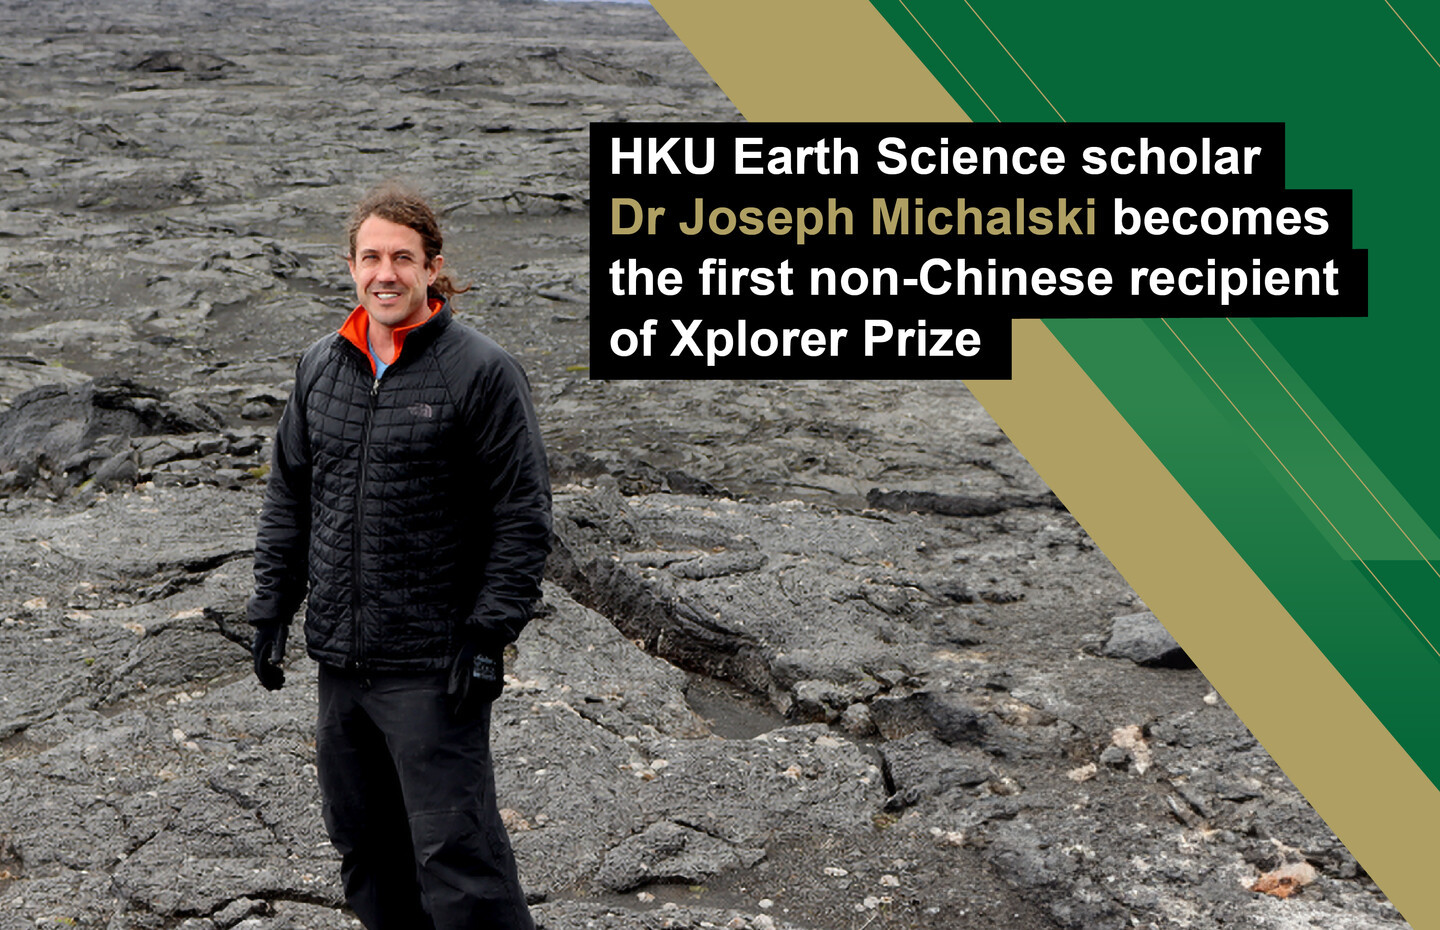 HKU Earth Science scholar Dr Joseph Michalski becomes the first non-Chinese recipient of Xplorer Prize